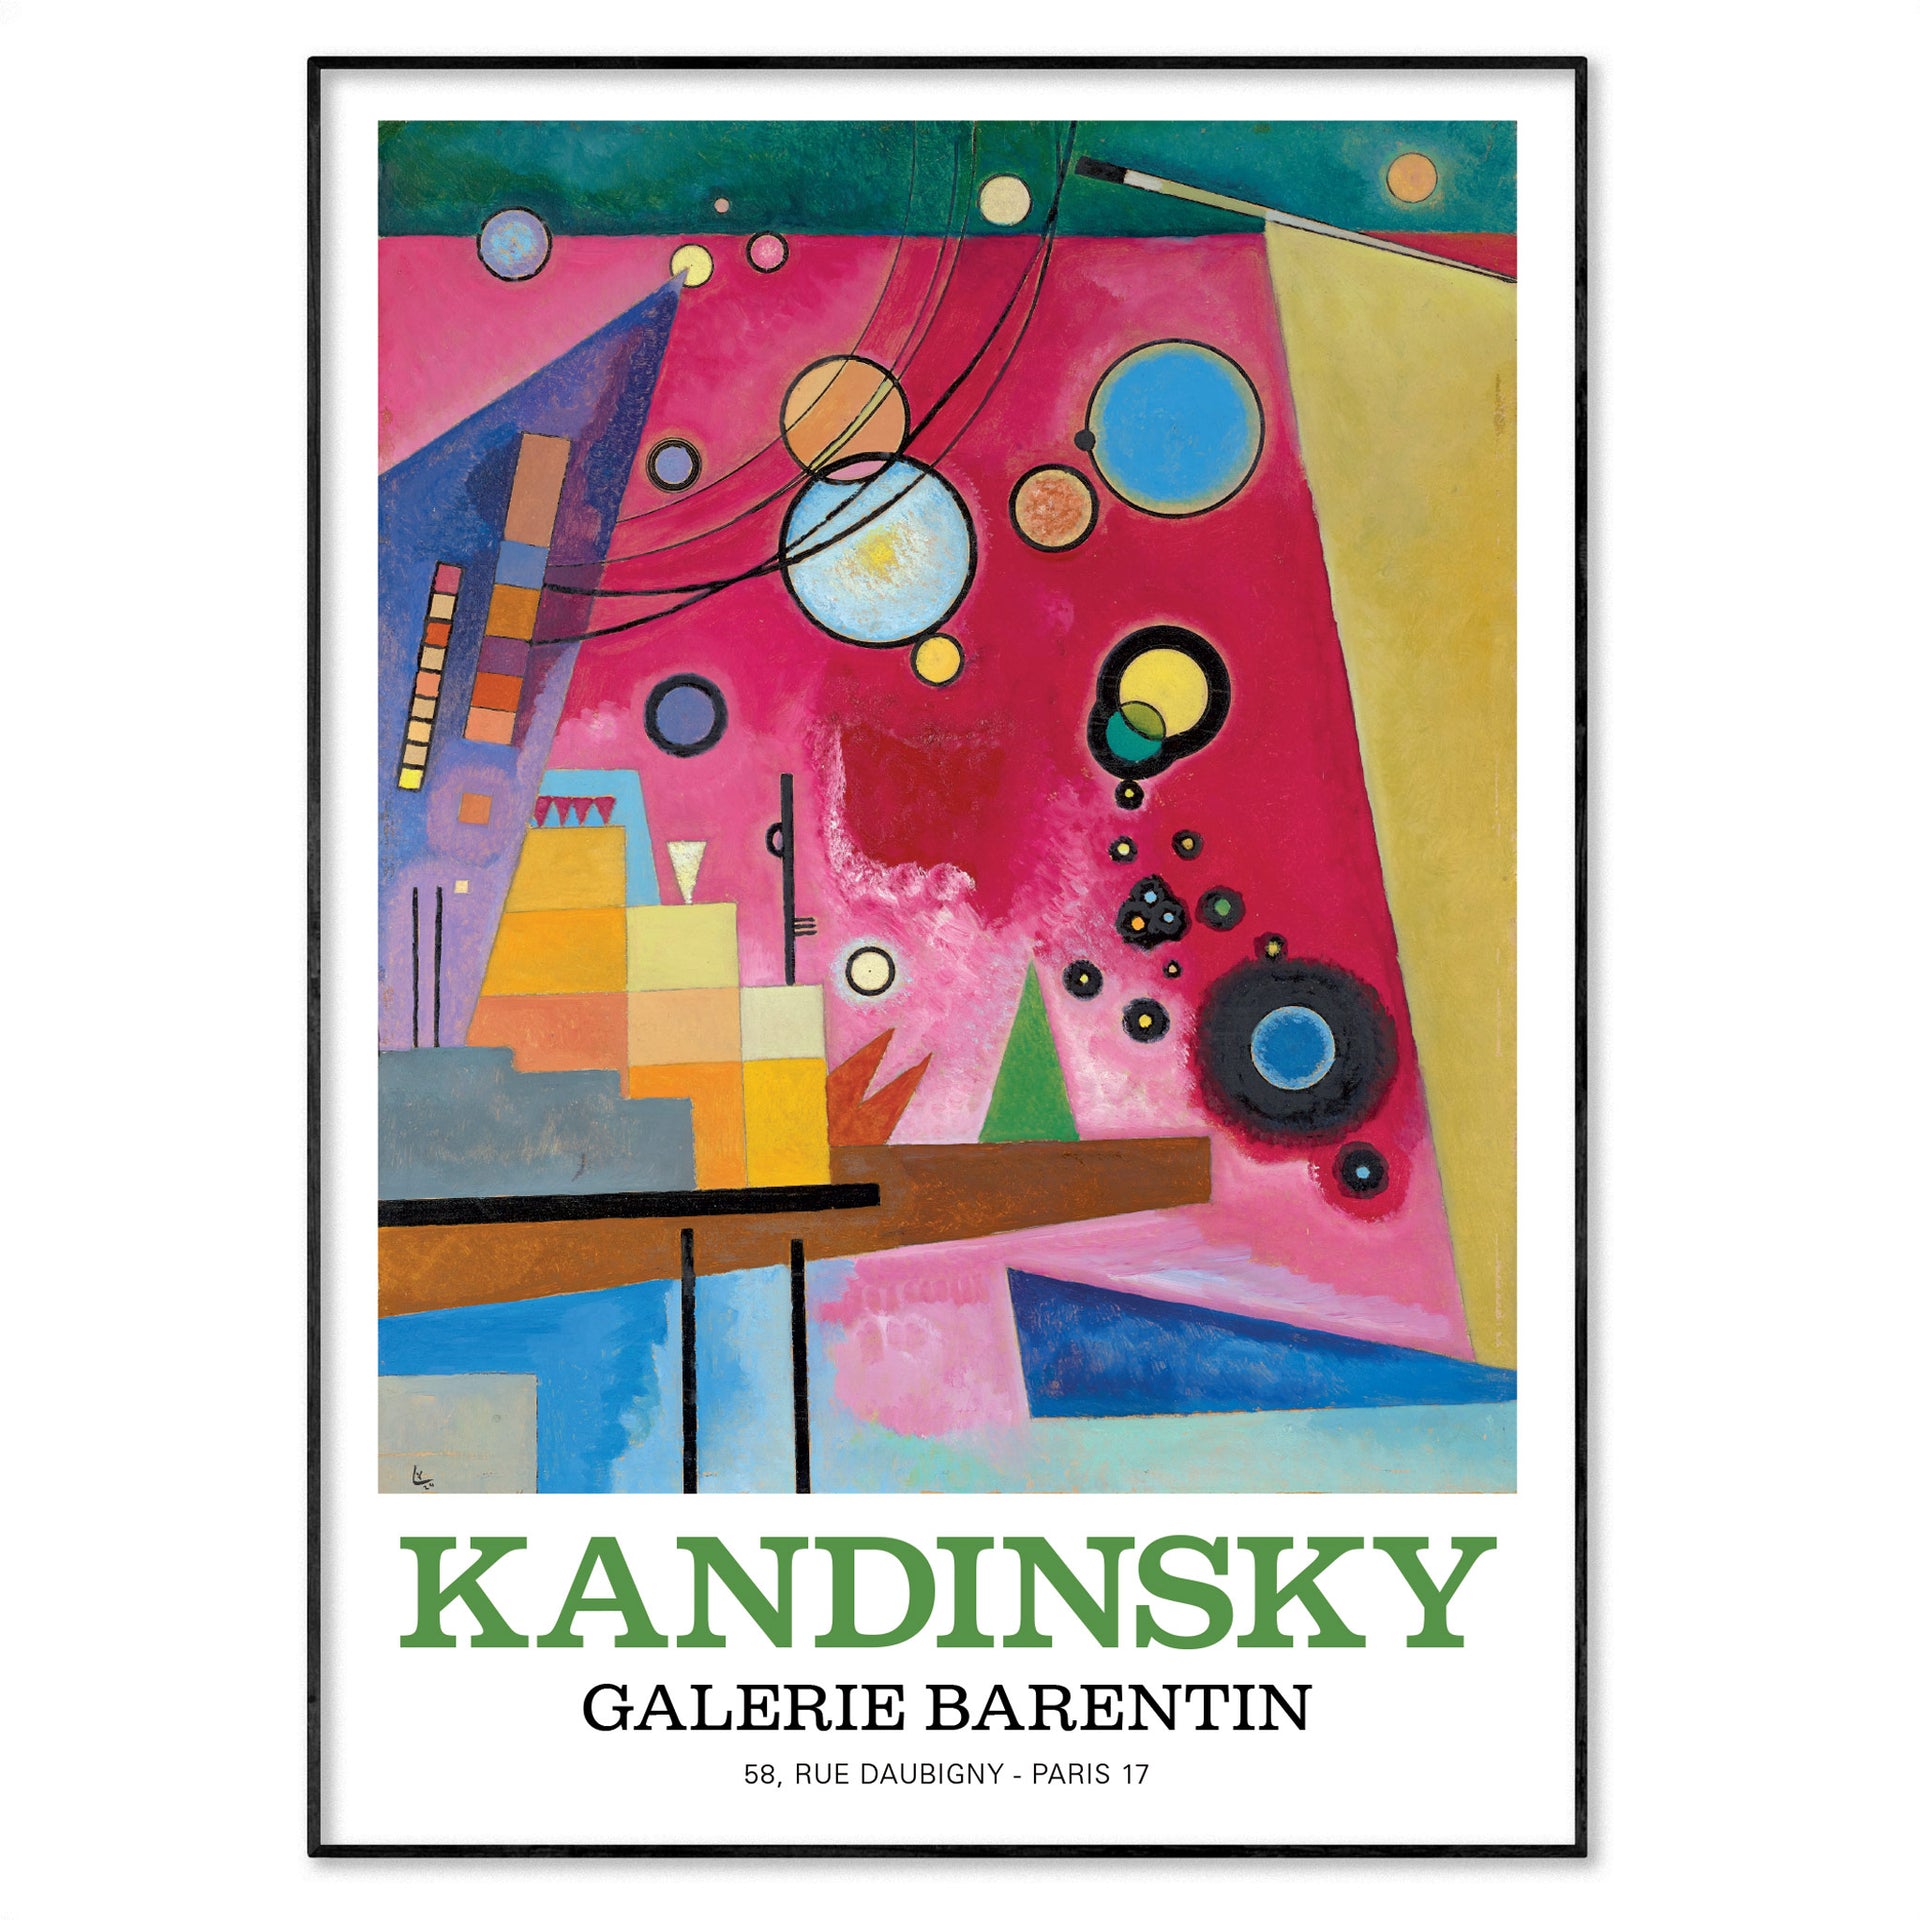 Exhibition Art Wassily Archive Poster – Kandinsky | artposterarchive Poster